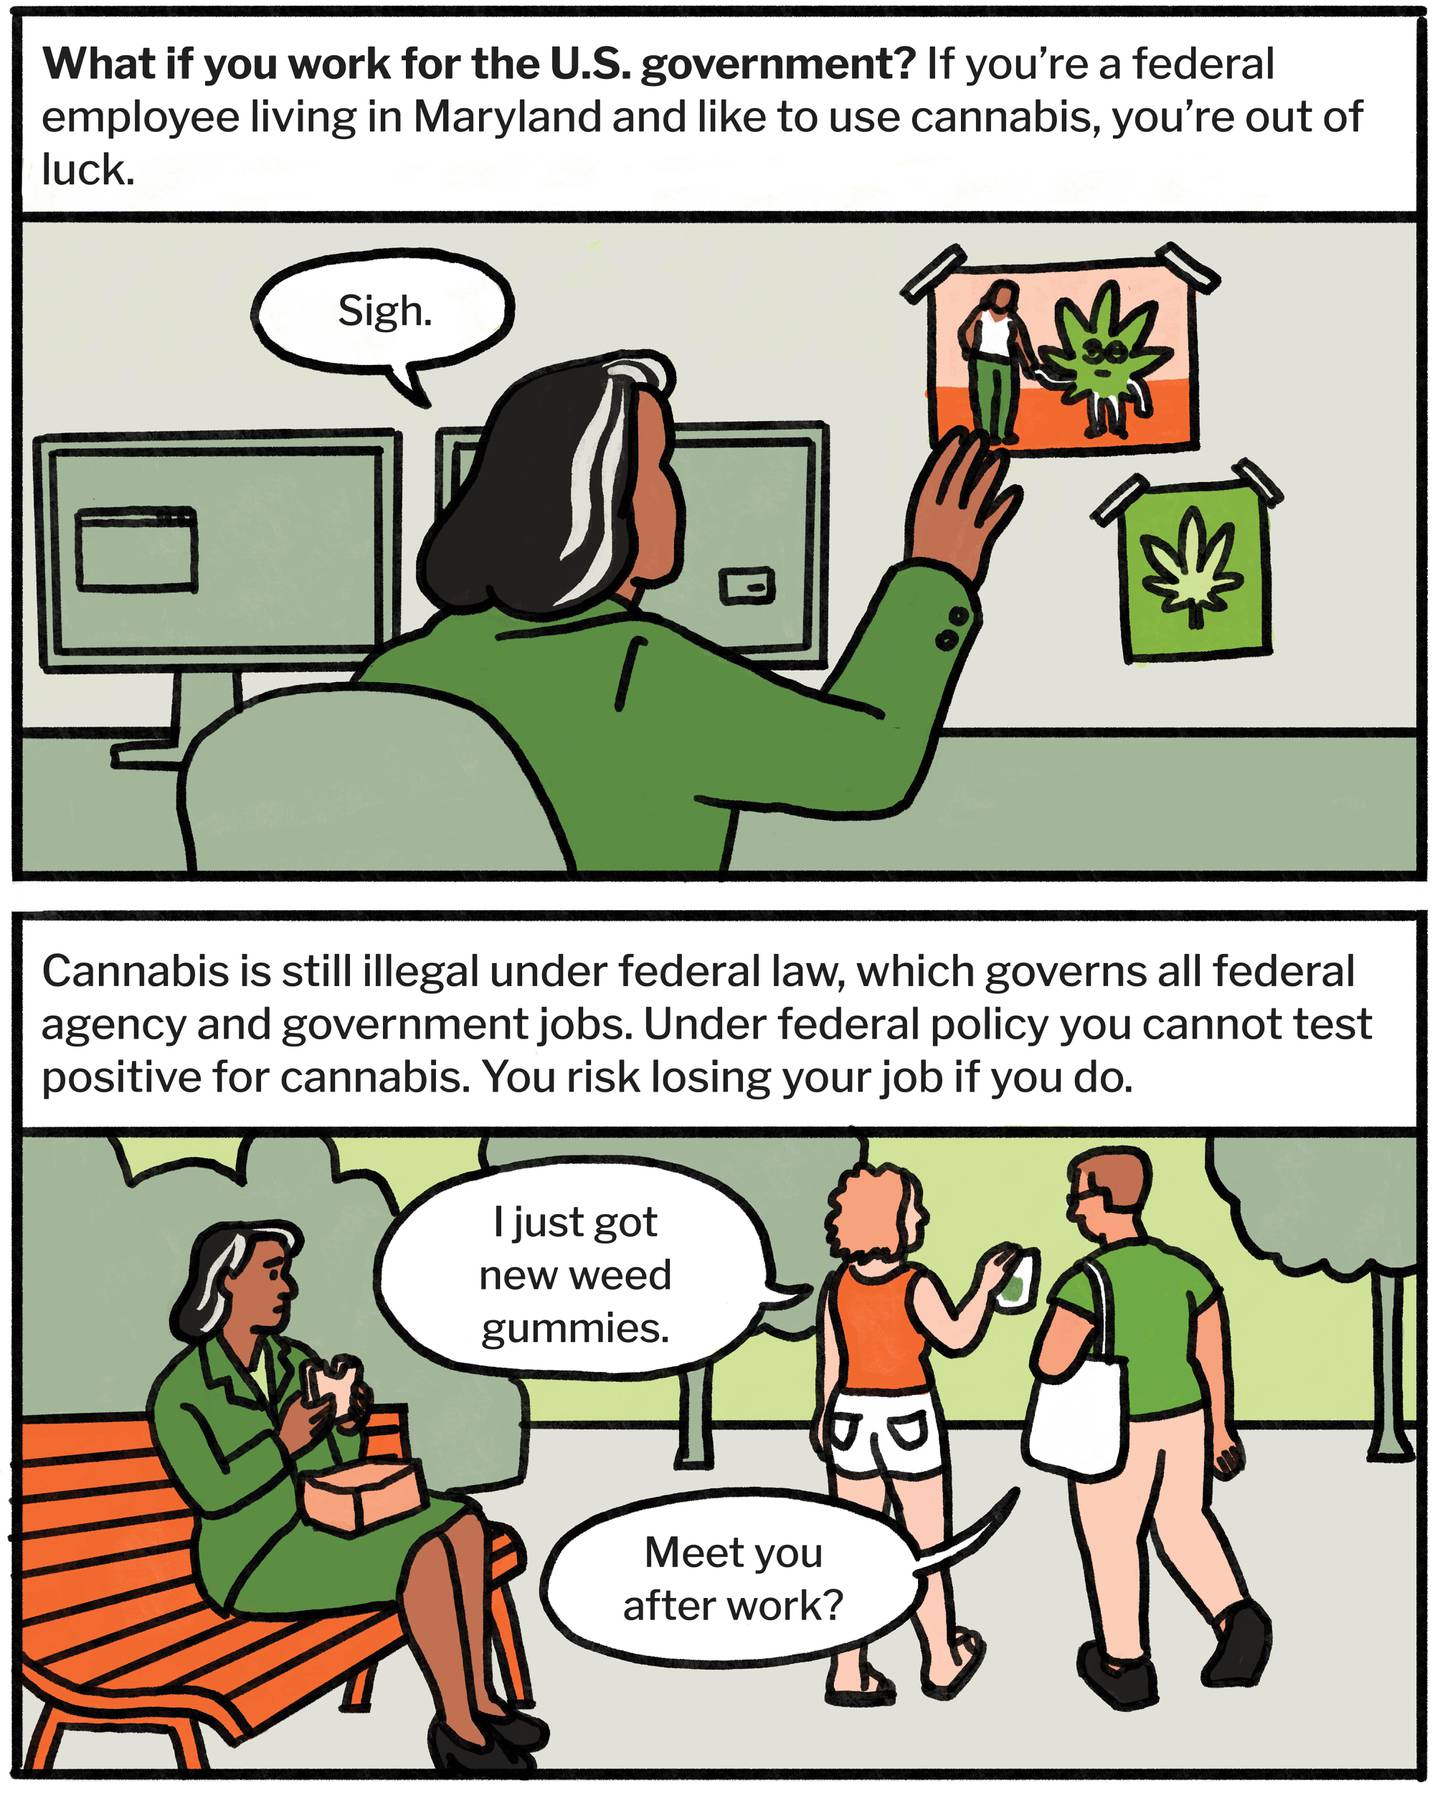 What if you work for the U.S. government? If you’re a federal employee living in Maryland and like to use cannabis, you’re out of luck.  Cannabis is still illegal under federal law, which governs all federal agency and government jobs. Under federal policy you cannot test positive for cannabis. You risk losing your job if you do.